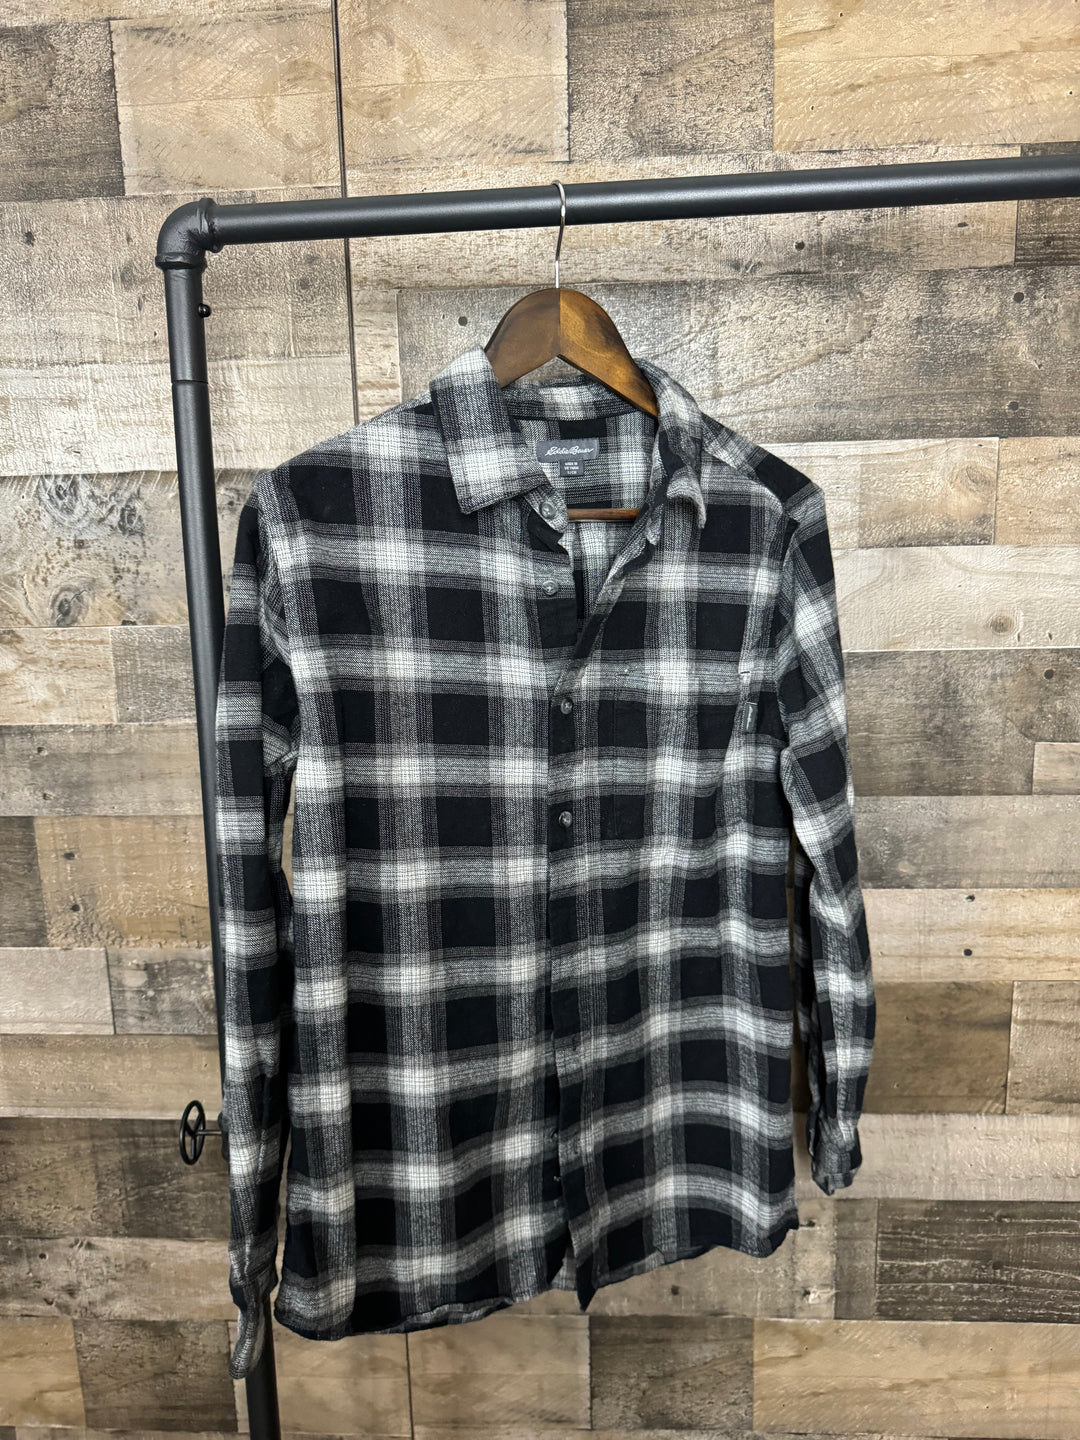 Comfy flannel